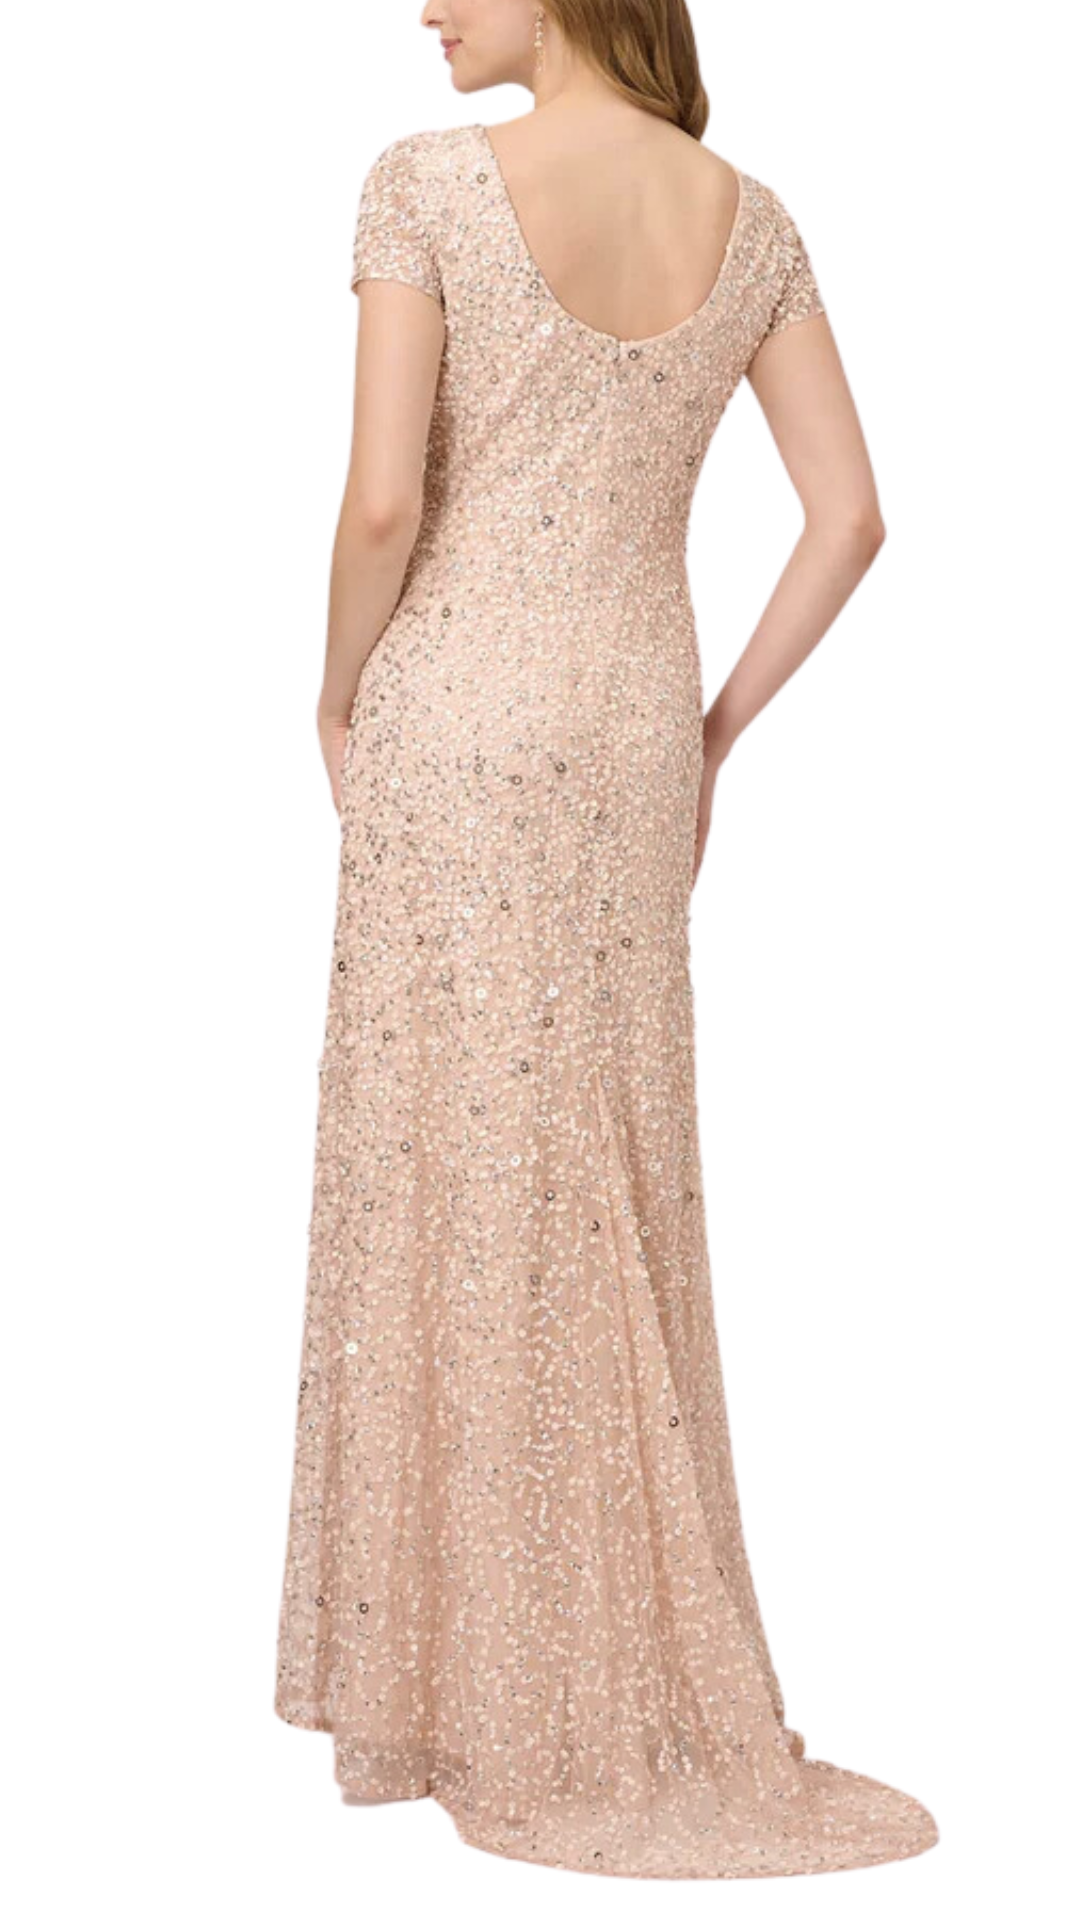 Adrianna Papell Scoop Back Sequin Gown in Blush